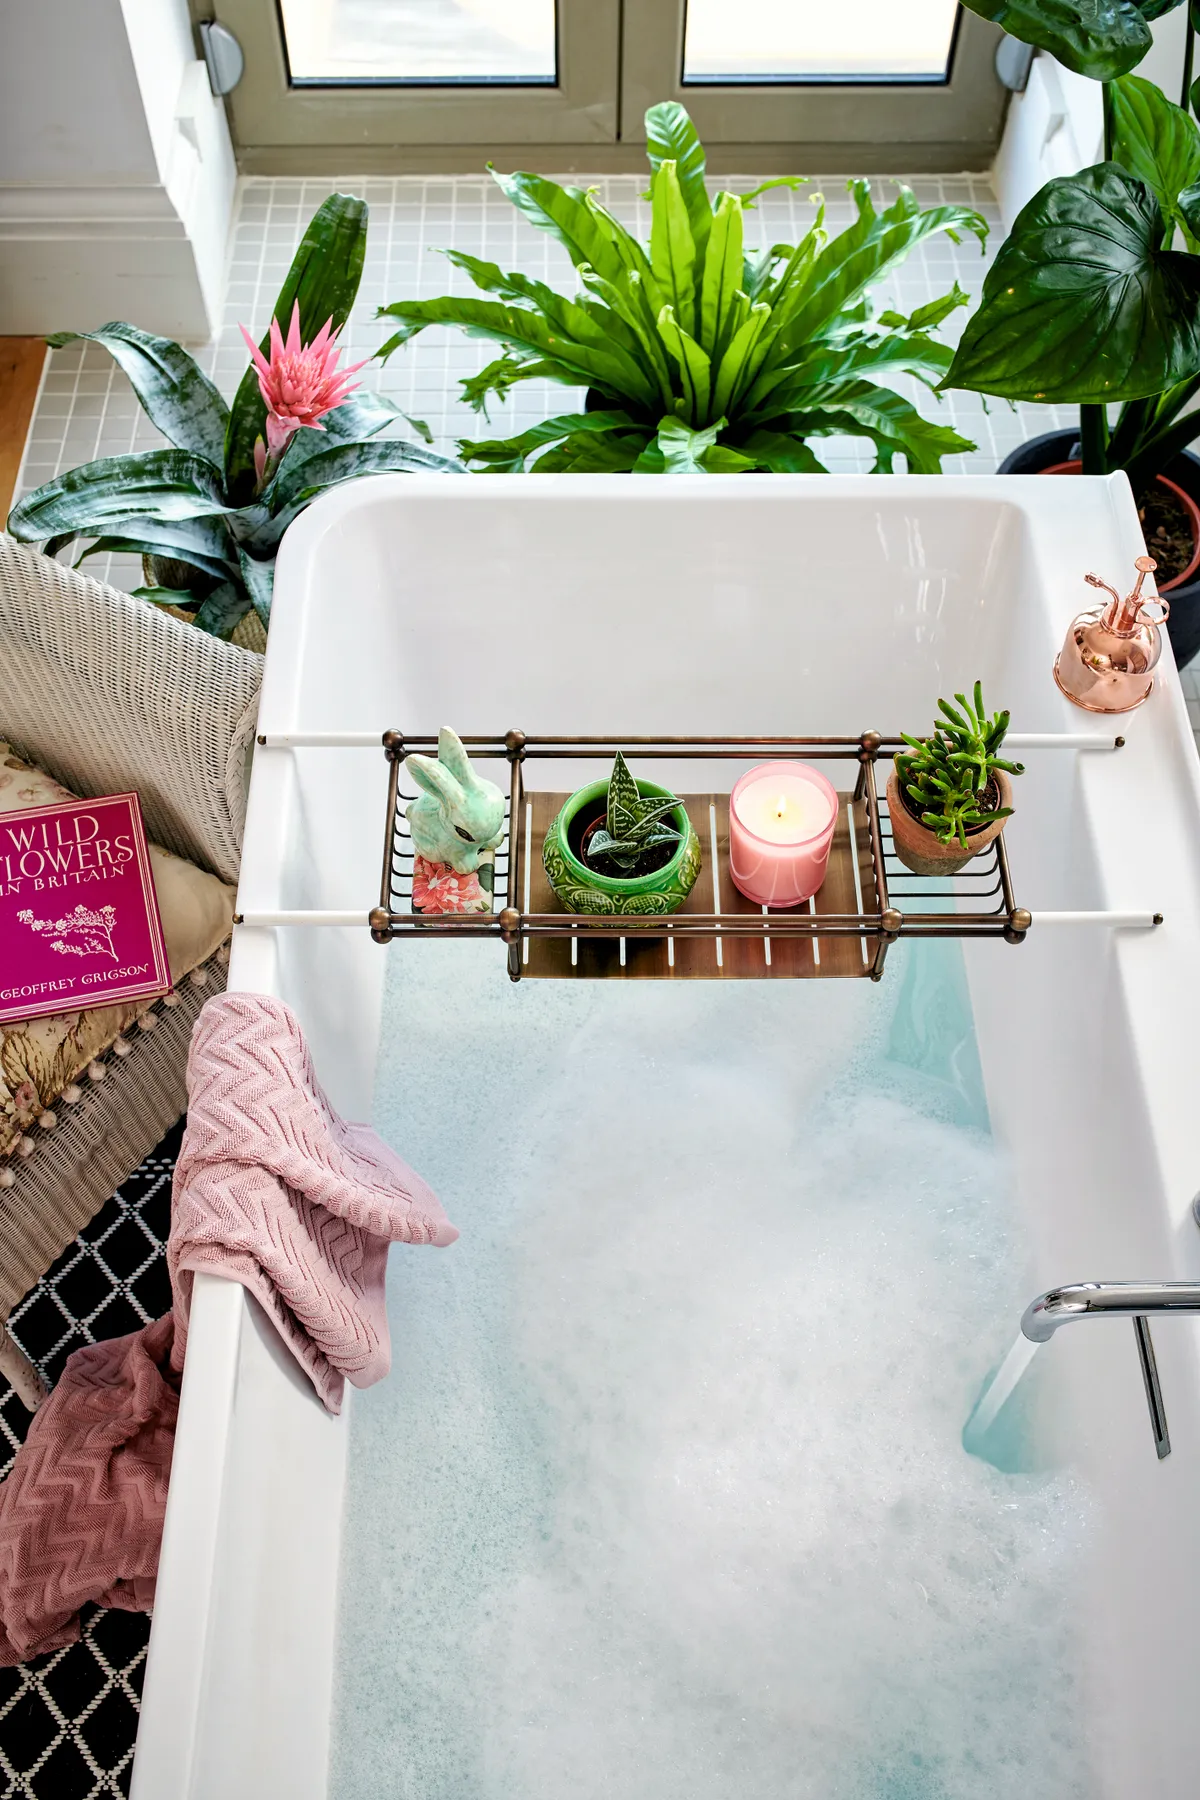 An overhead shot of a full bathtub surrounded by plants.